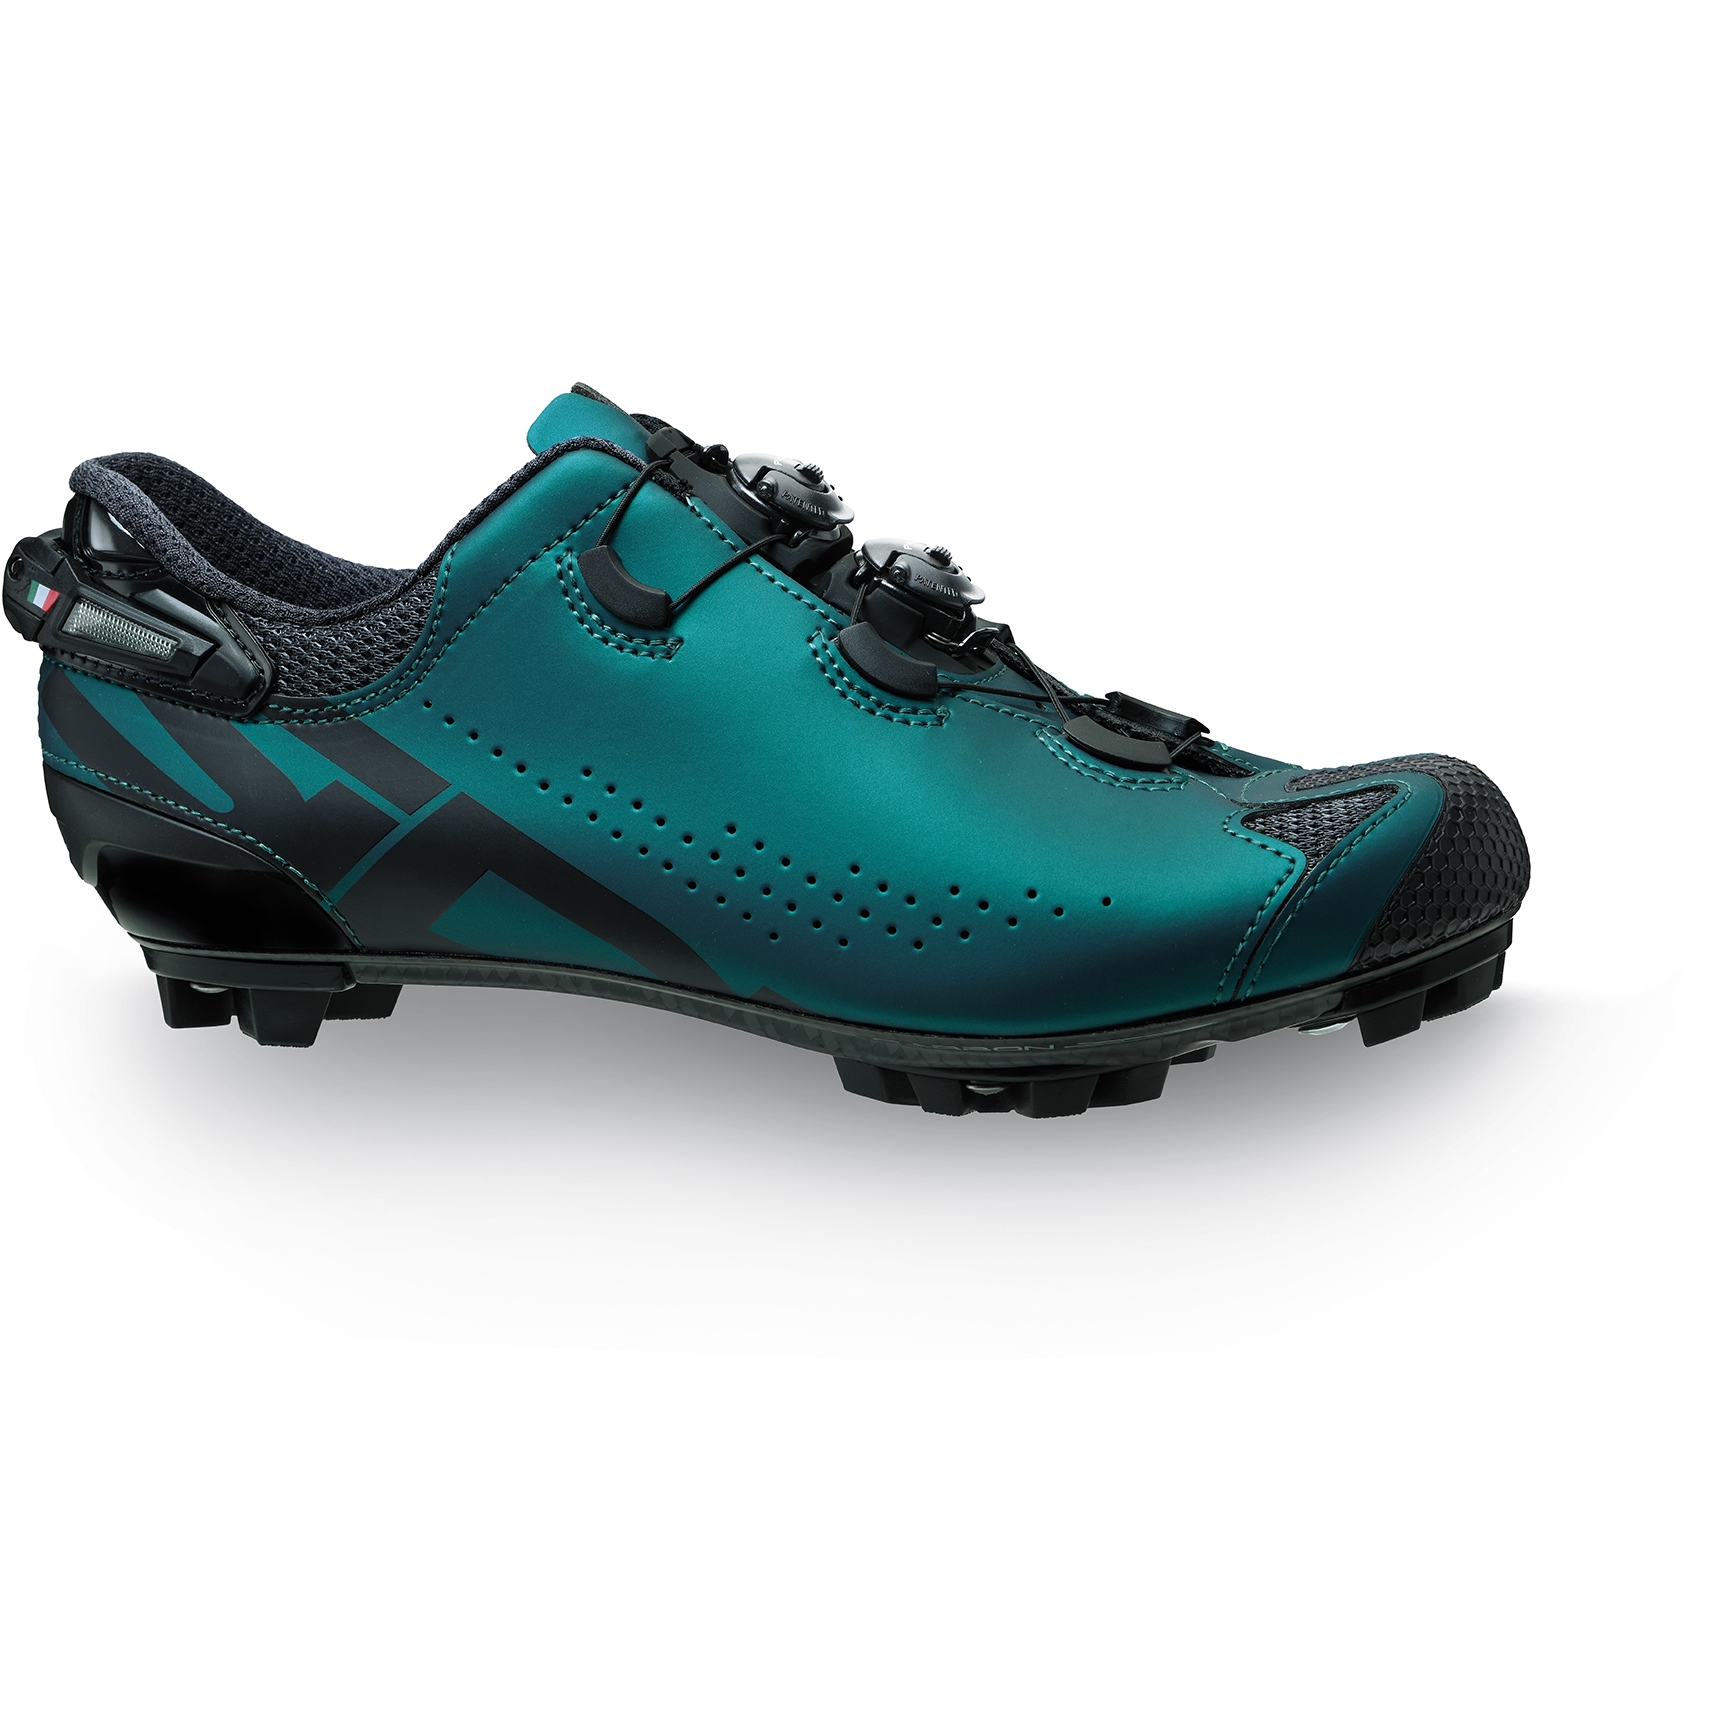 Picture of Sidi Tiger 2S SRS MTB Shoes - Deep Teal/Black